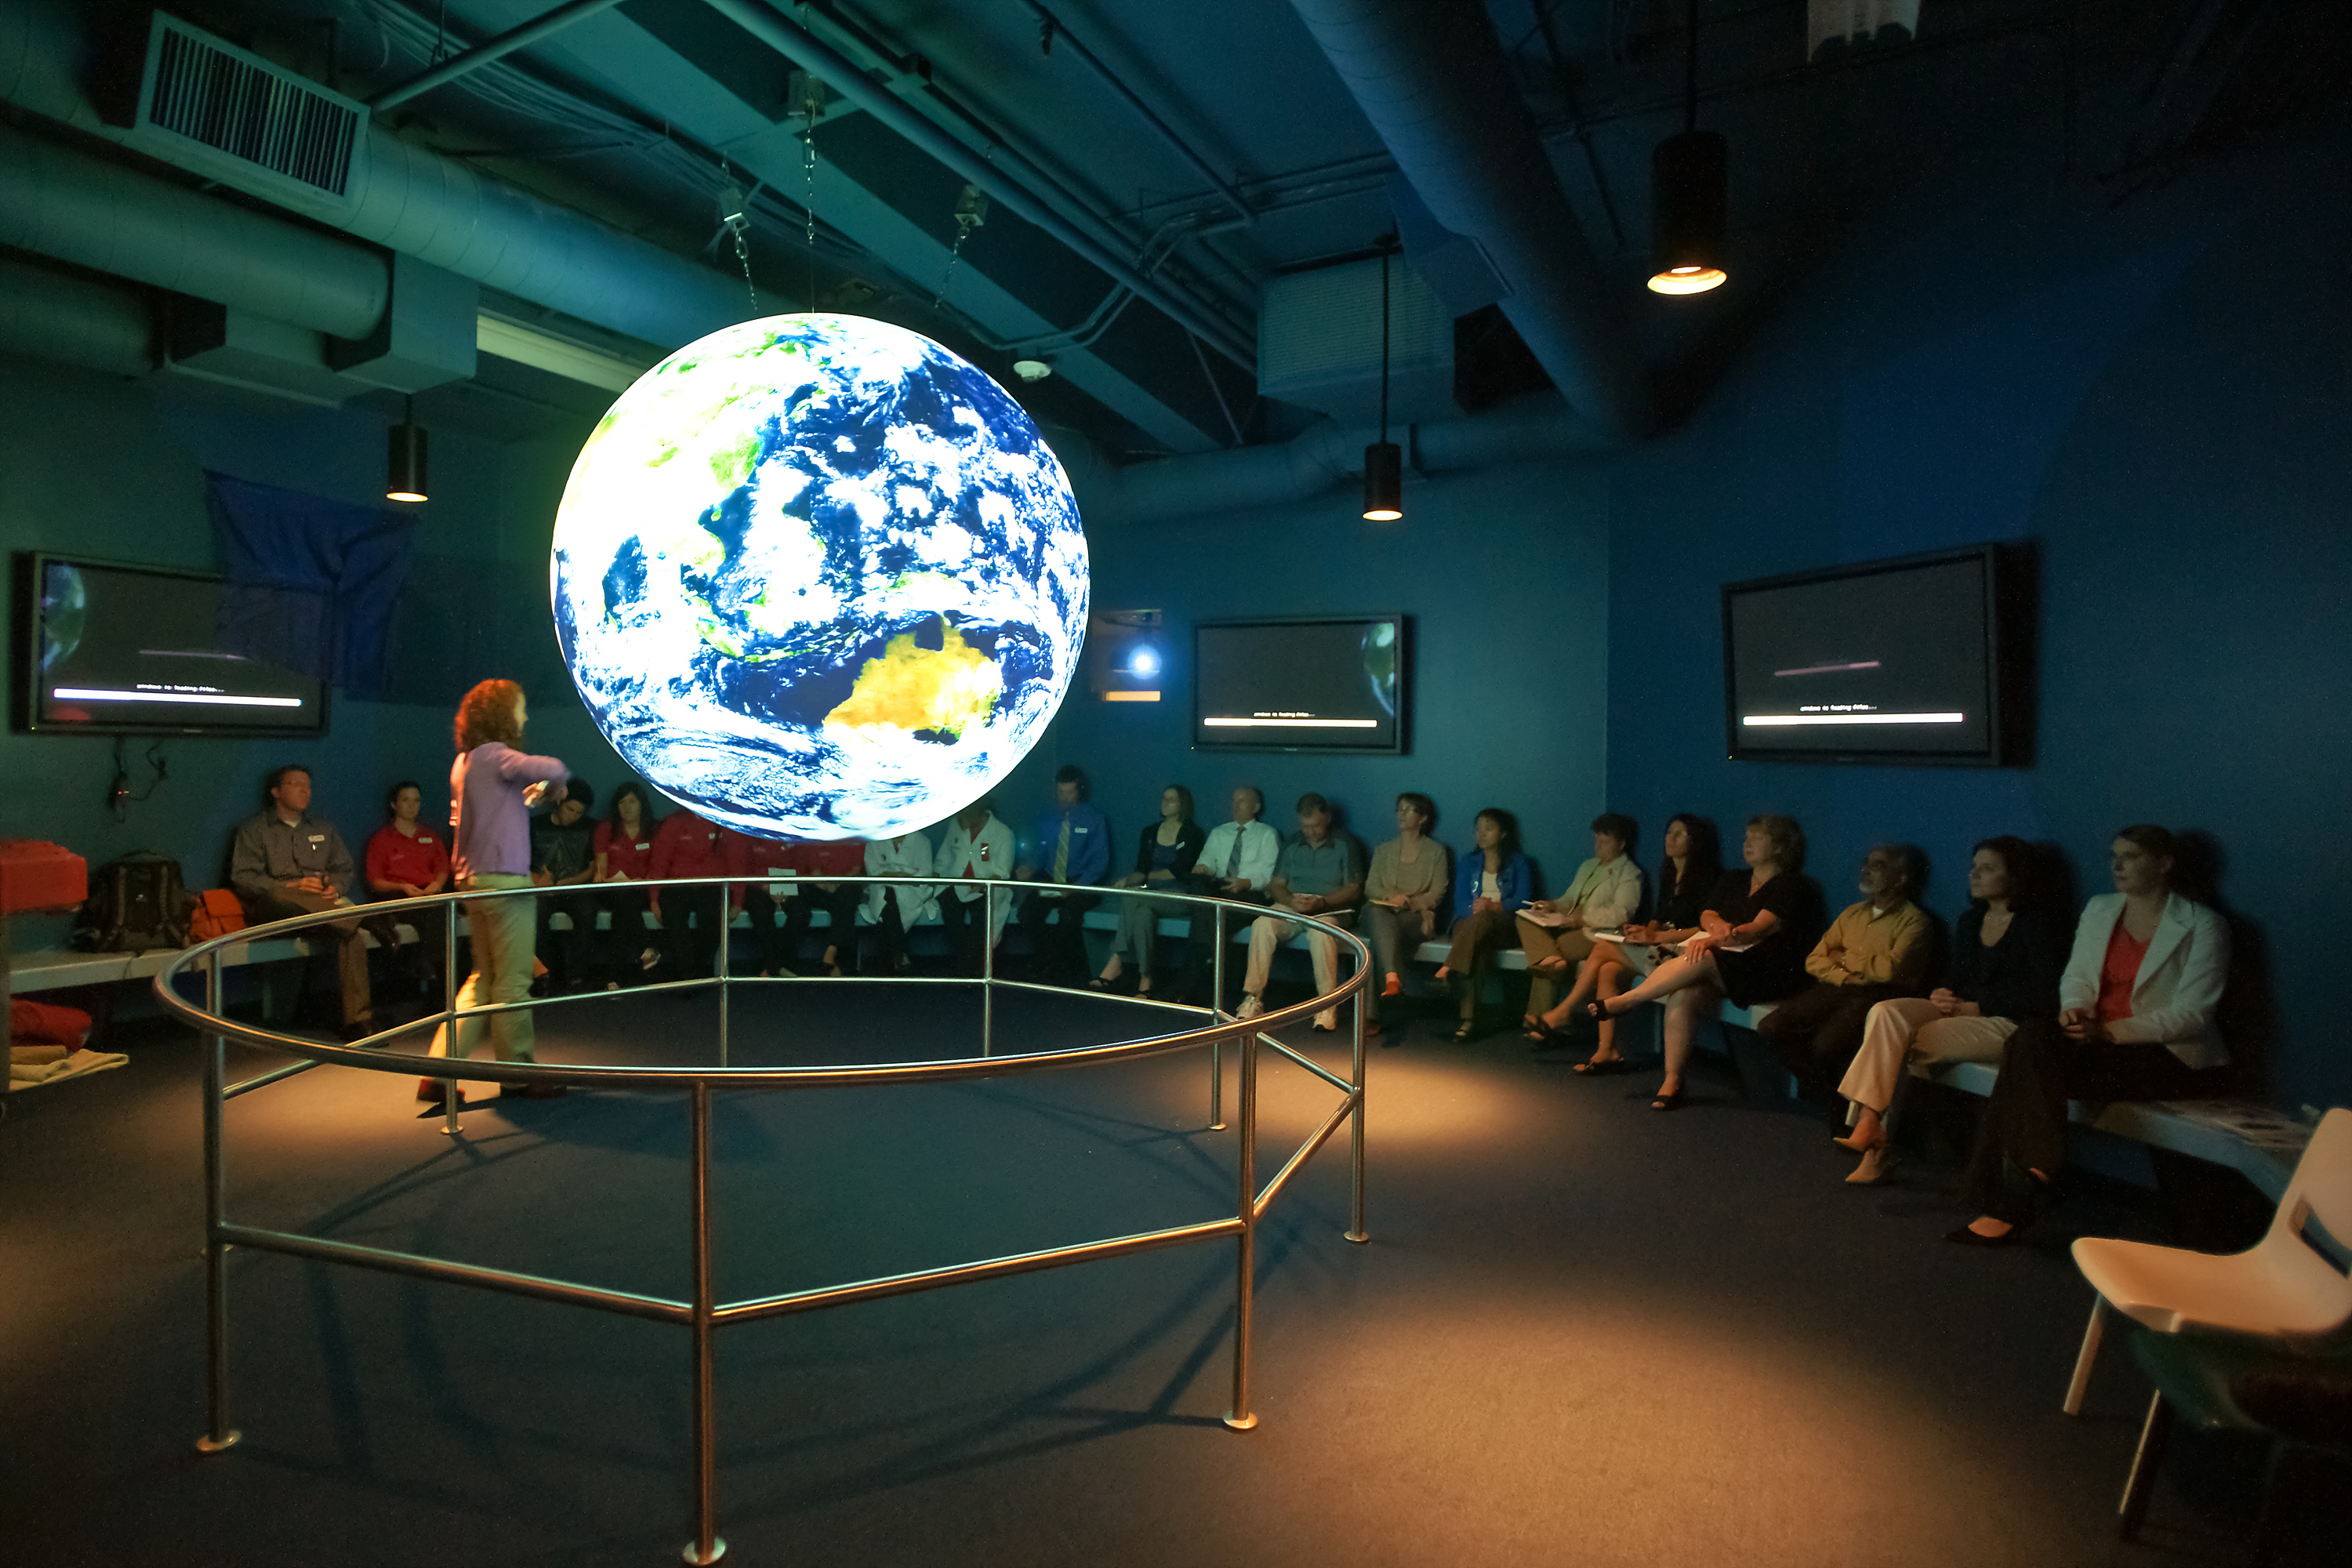 A group of adults sit on benches lining the walls surrounding Science On a Sphere watching a presentation